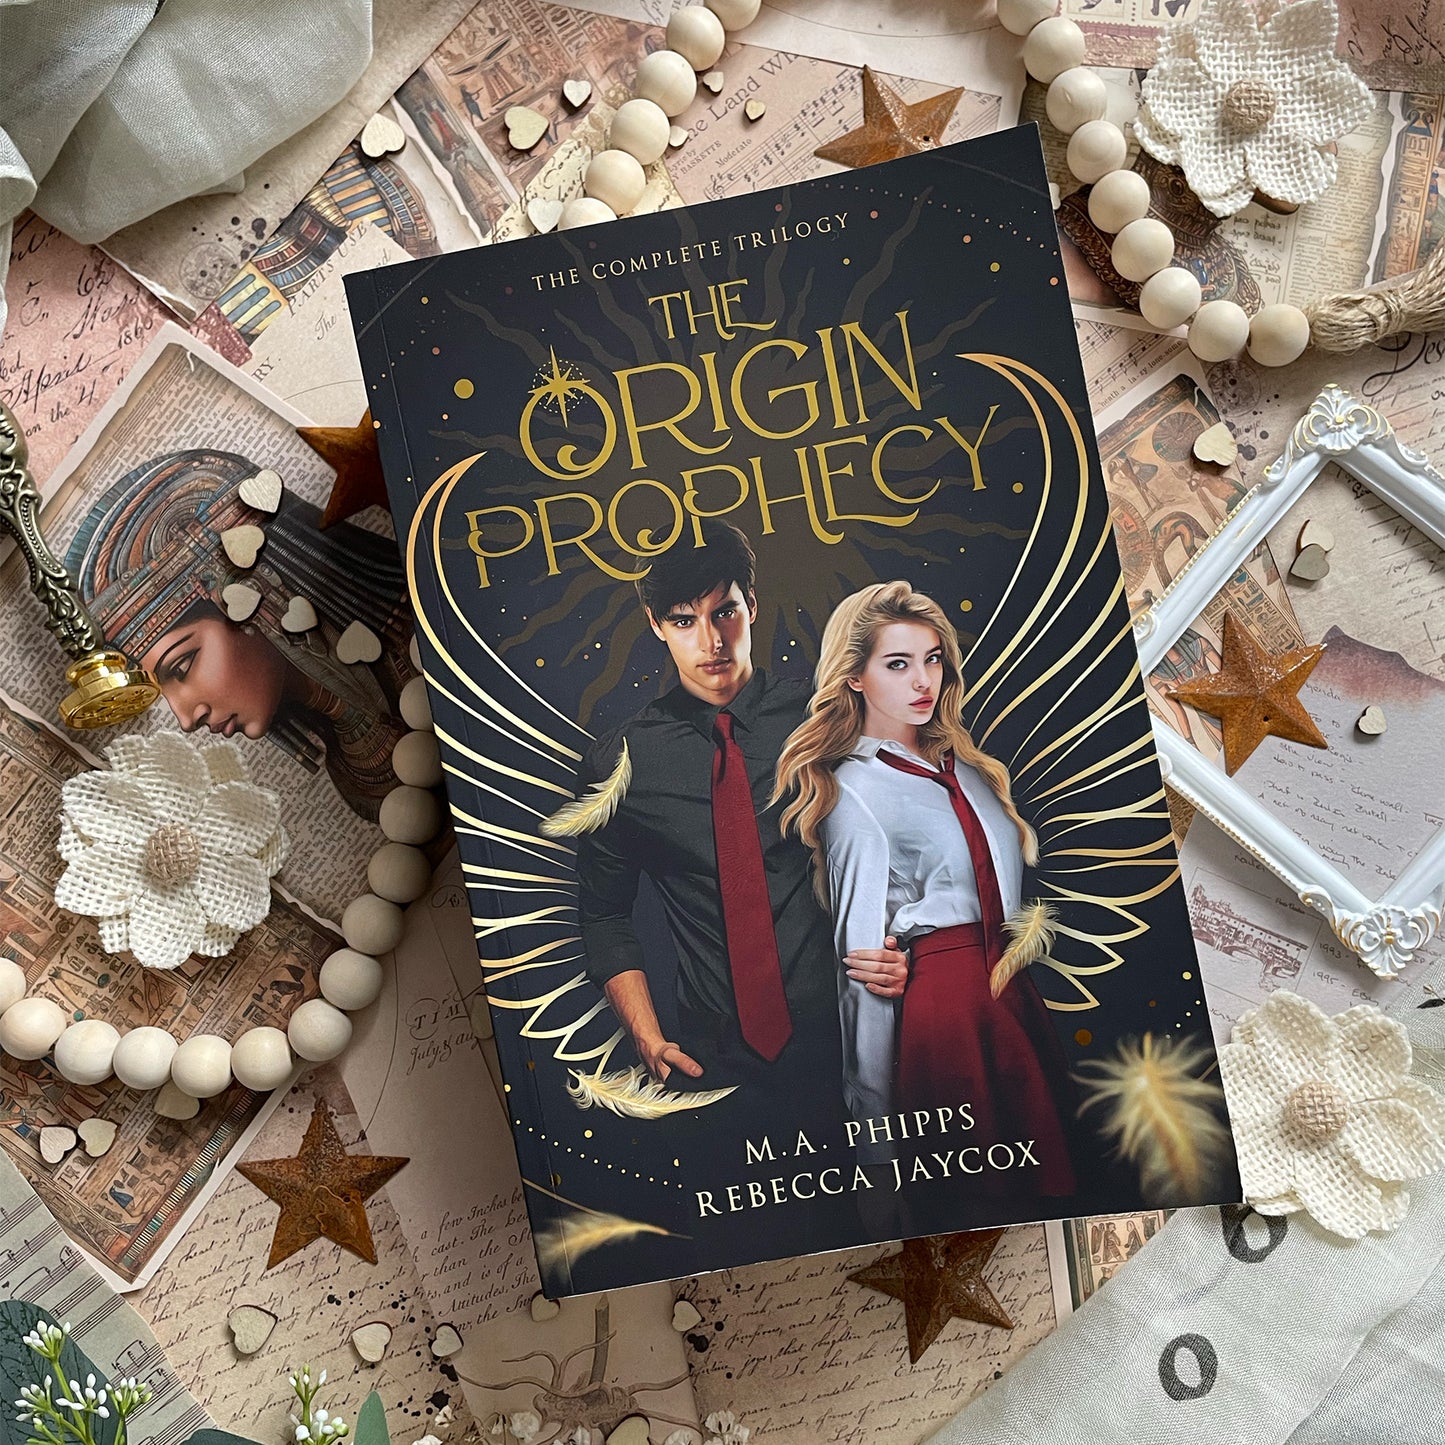 The Origin Prophecy Complete Trilogy (Special Edition)